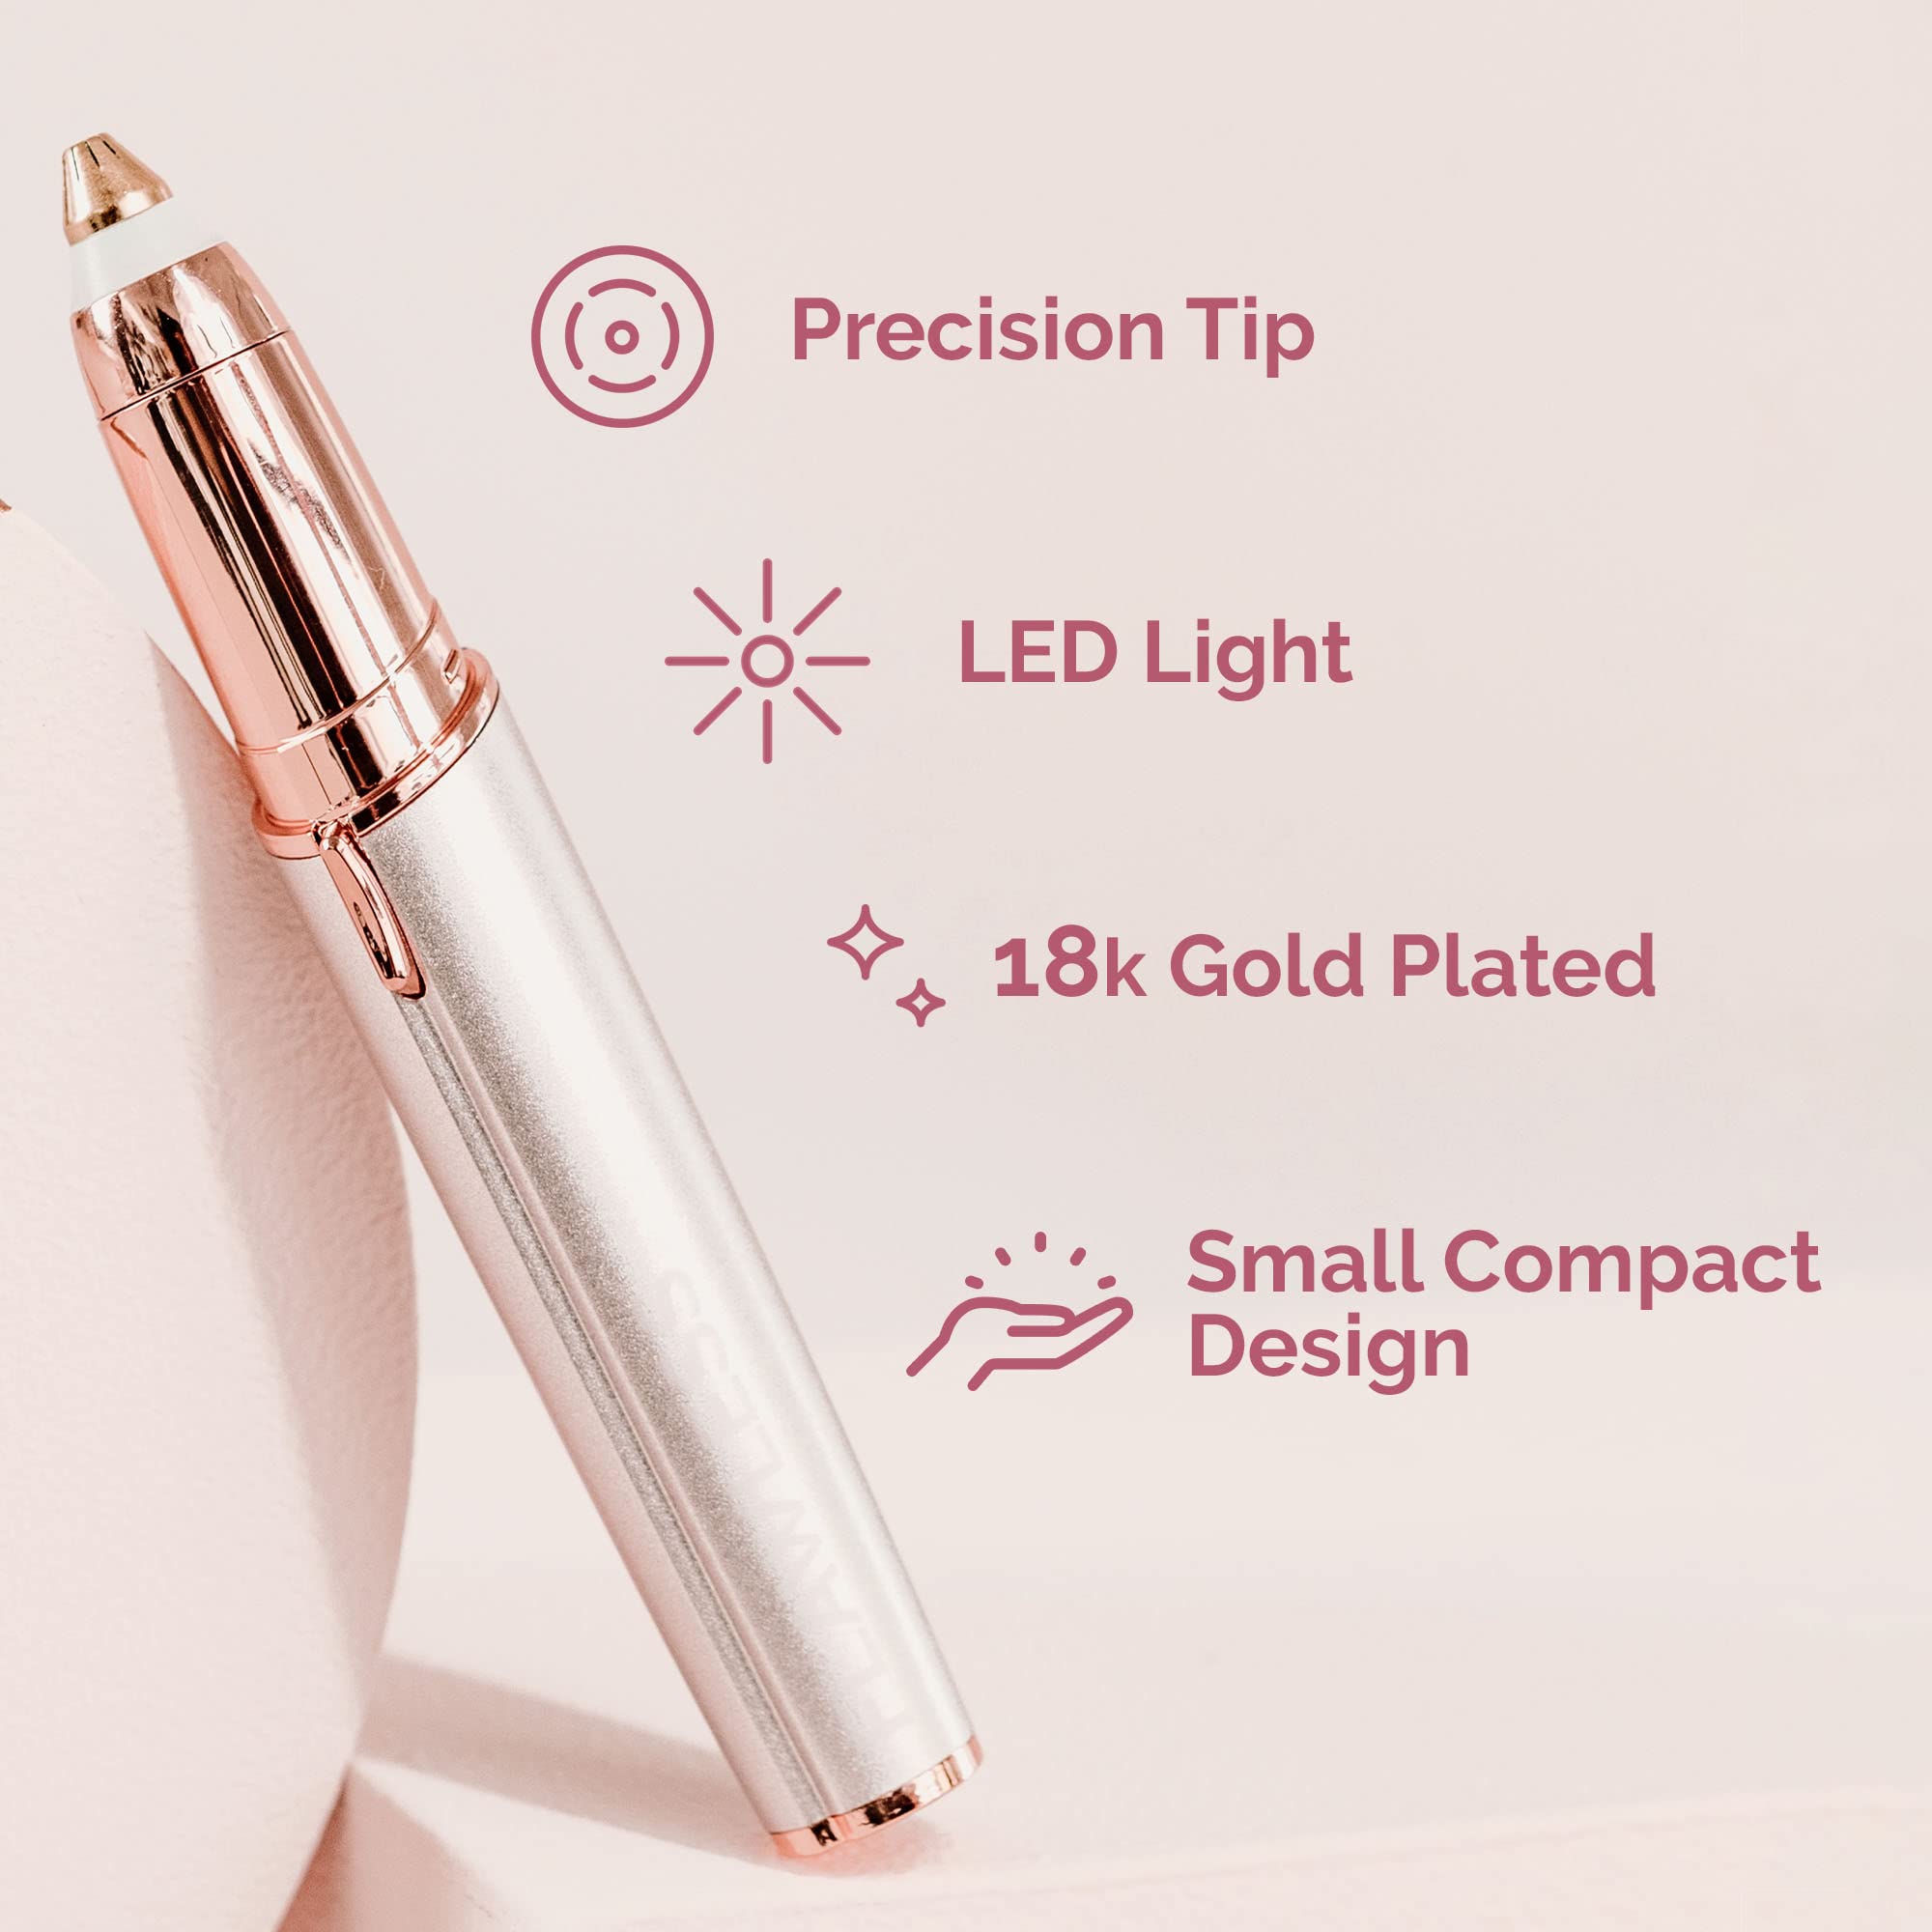 Finishing Touch Flawless Brows Remover, Electric Eyebrow Razor for Women with LED Light for Instant and Painless Hair Removal